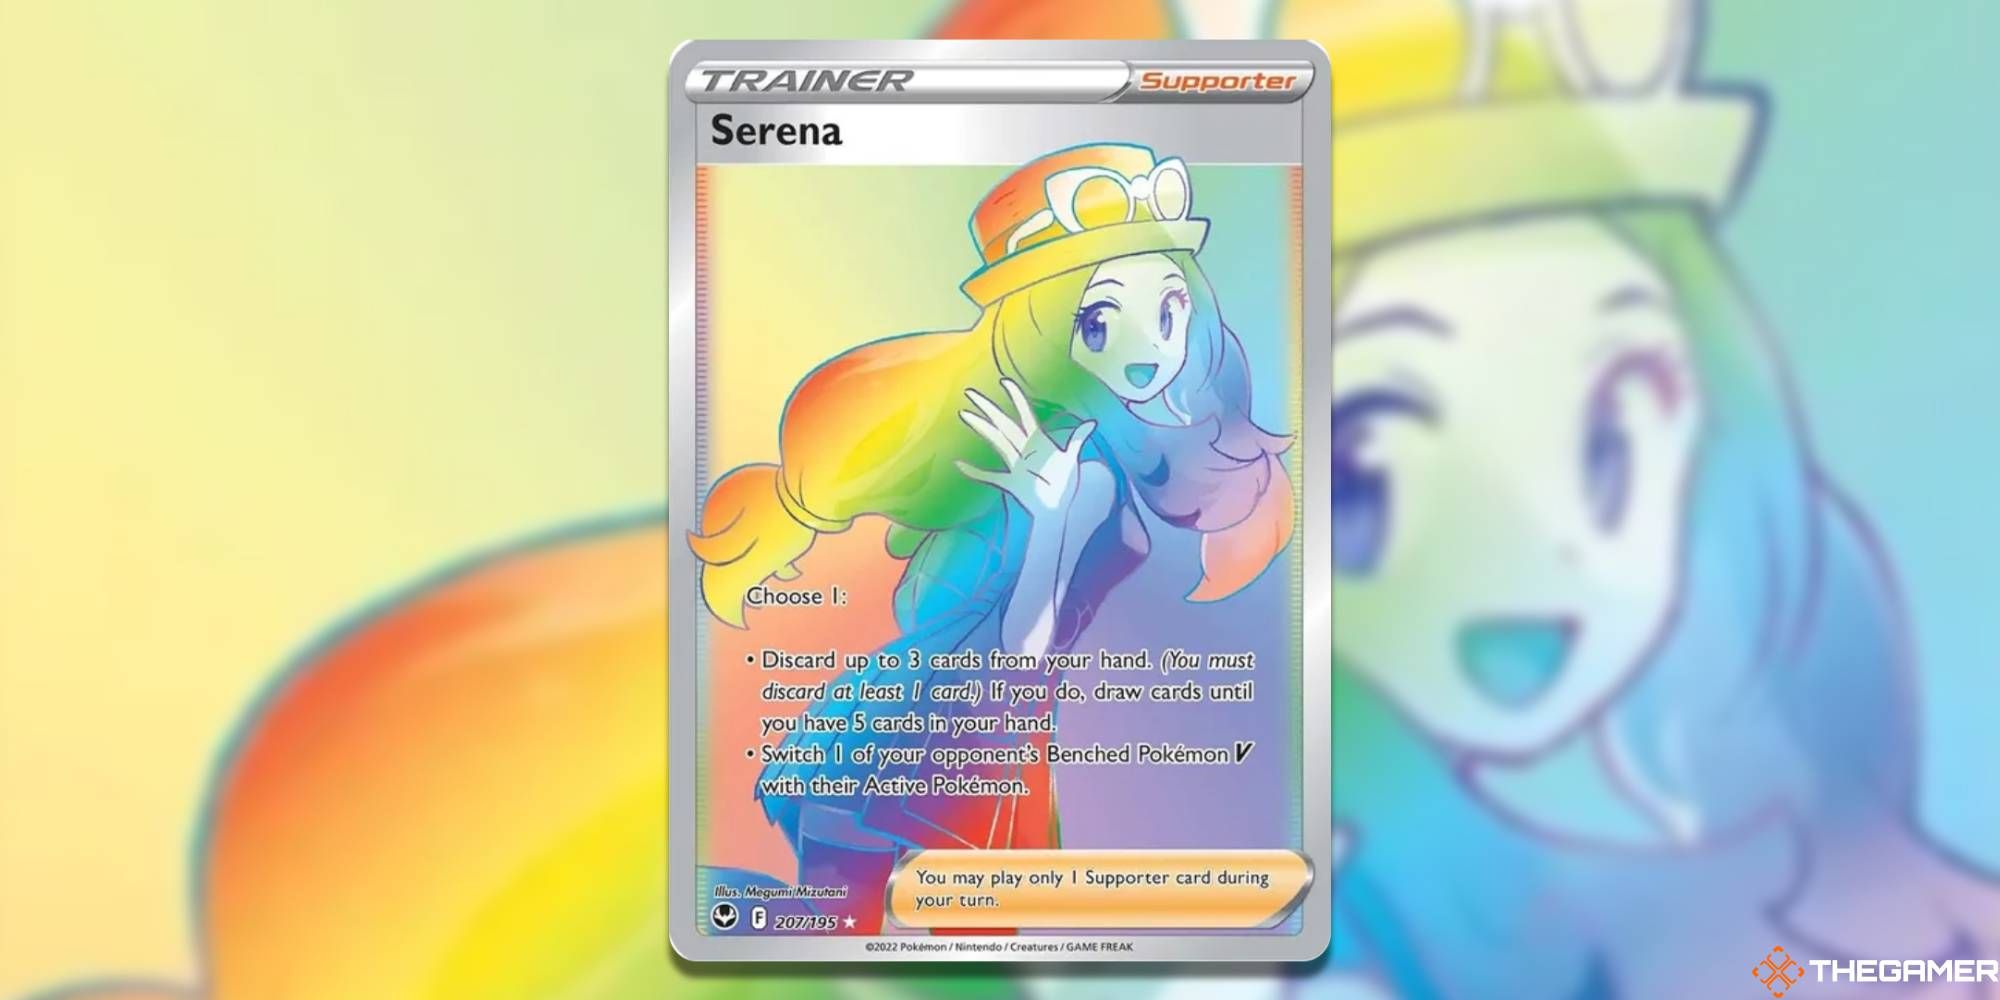 Serena Rainbow Rare from Pokemon TCG with blurred background